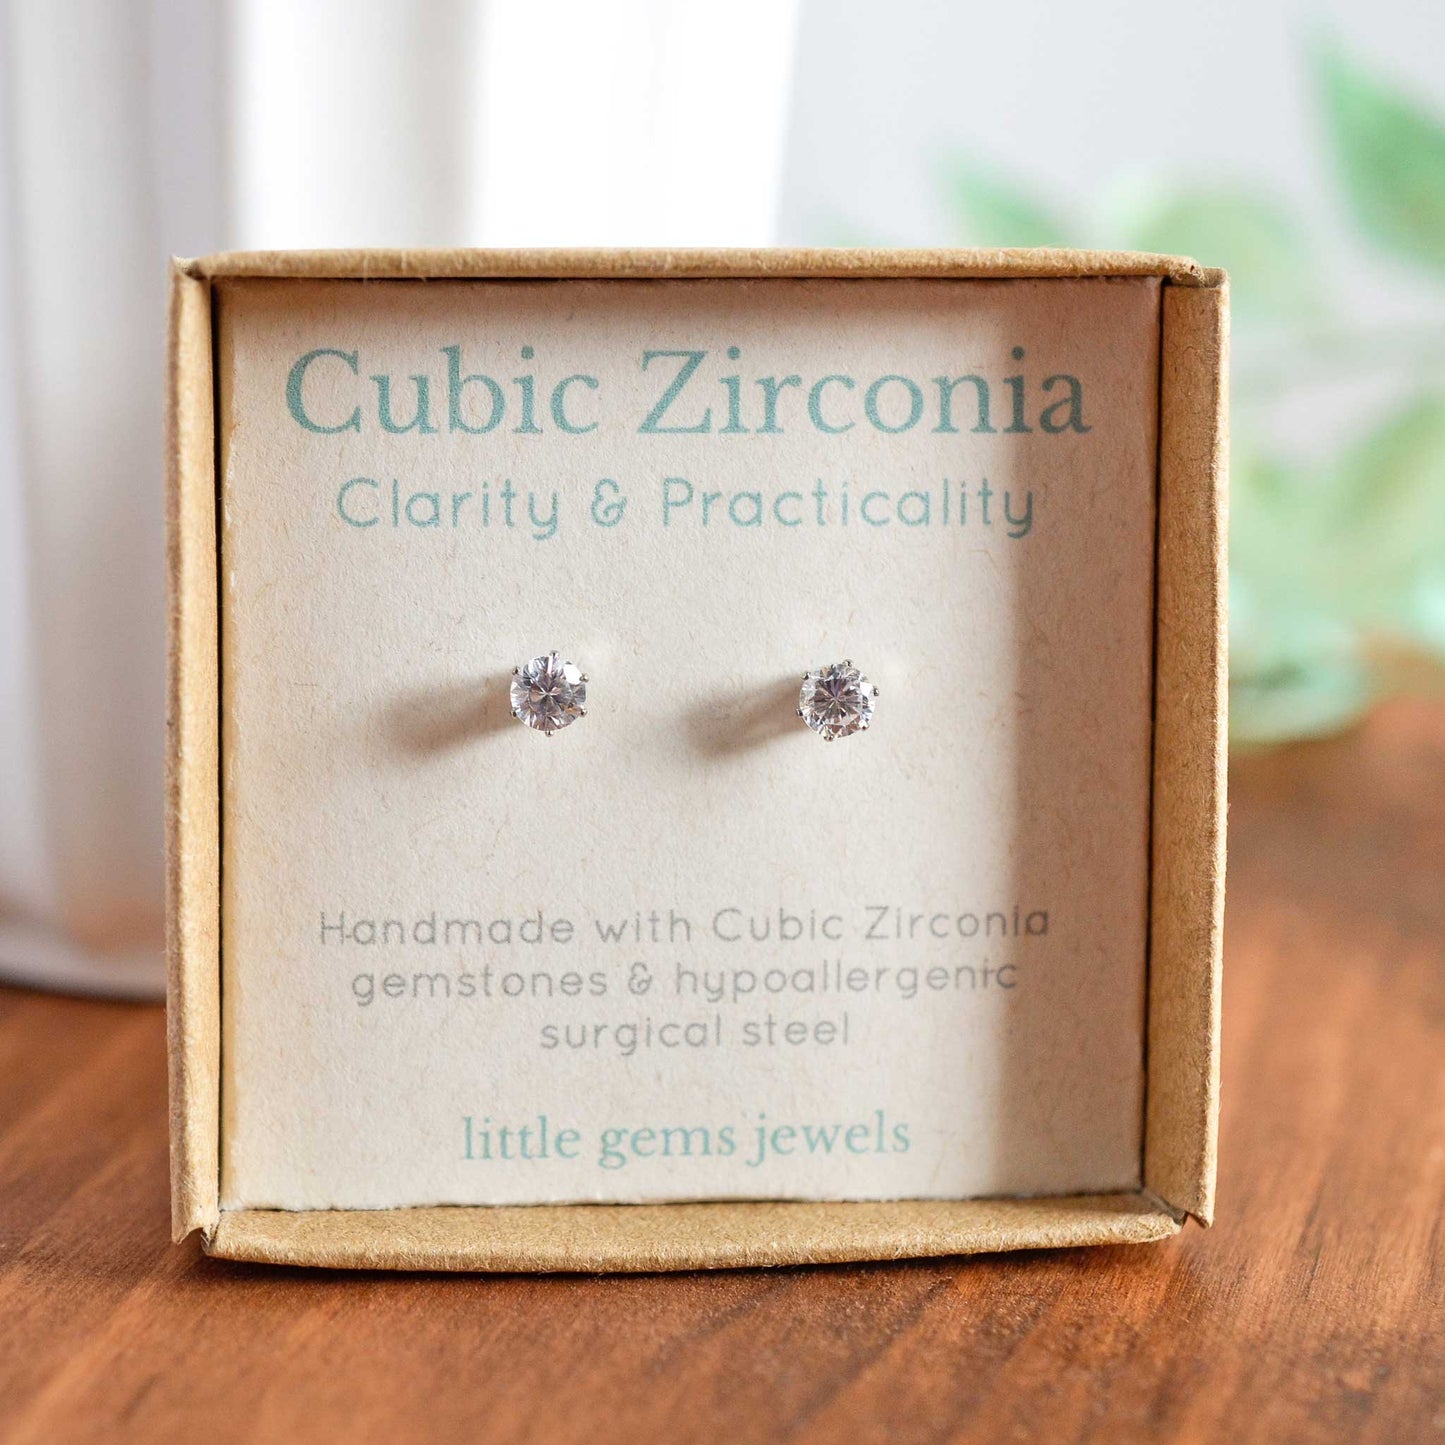 Cubic Zirconia for clarity and practicality gemstone stud earrings in eco friendly gift box